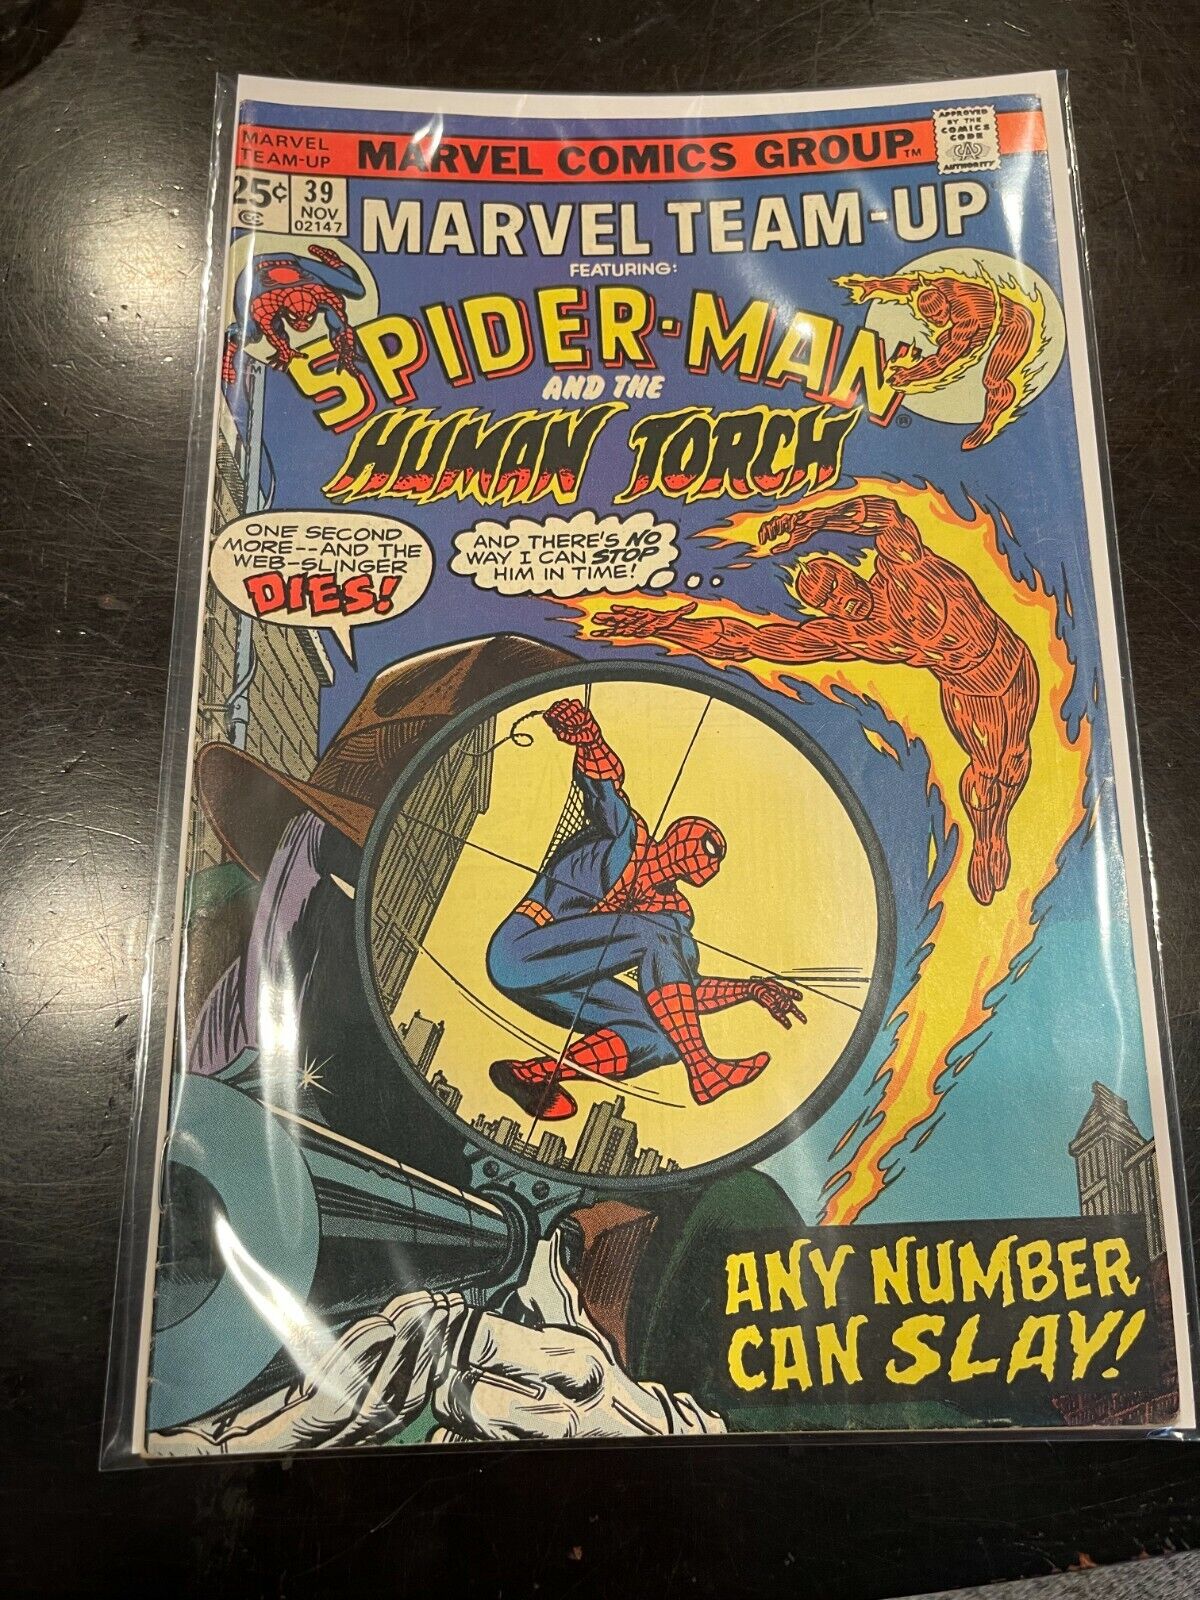 Marvel Team-Up #39 (Marvel, 1975) Spiderman and Human Torch